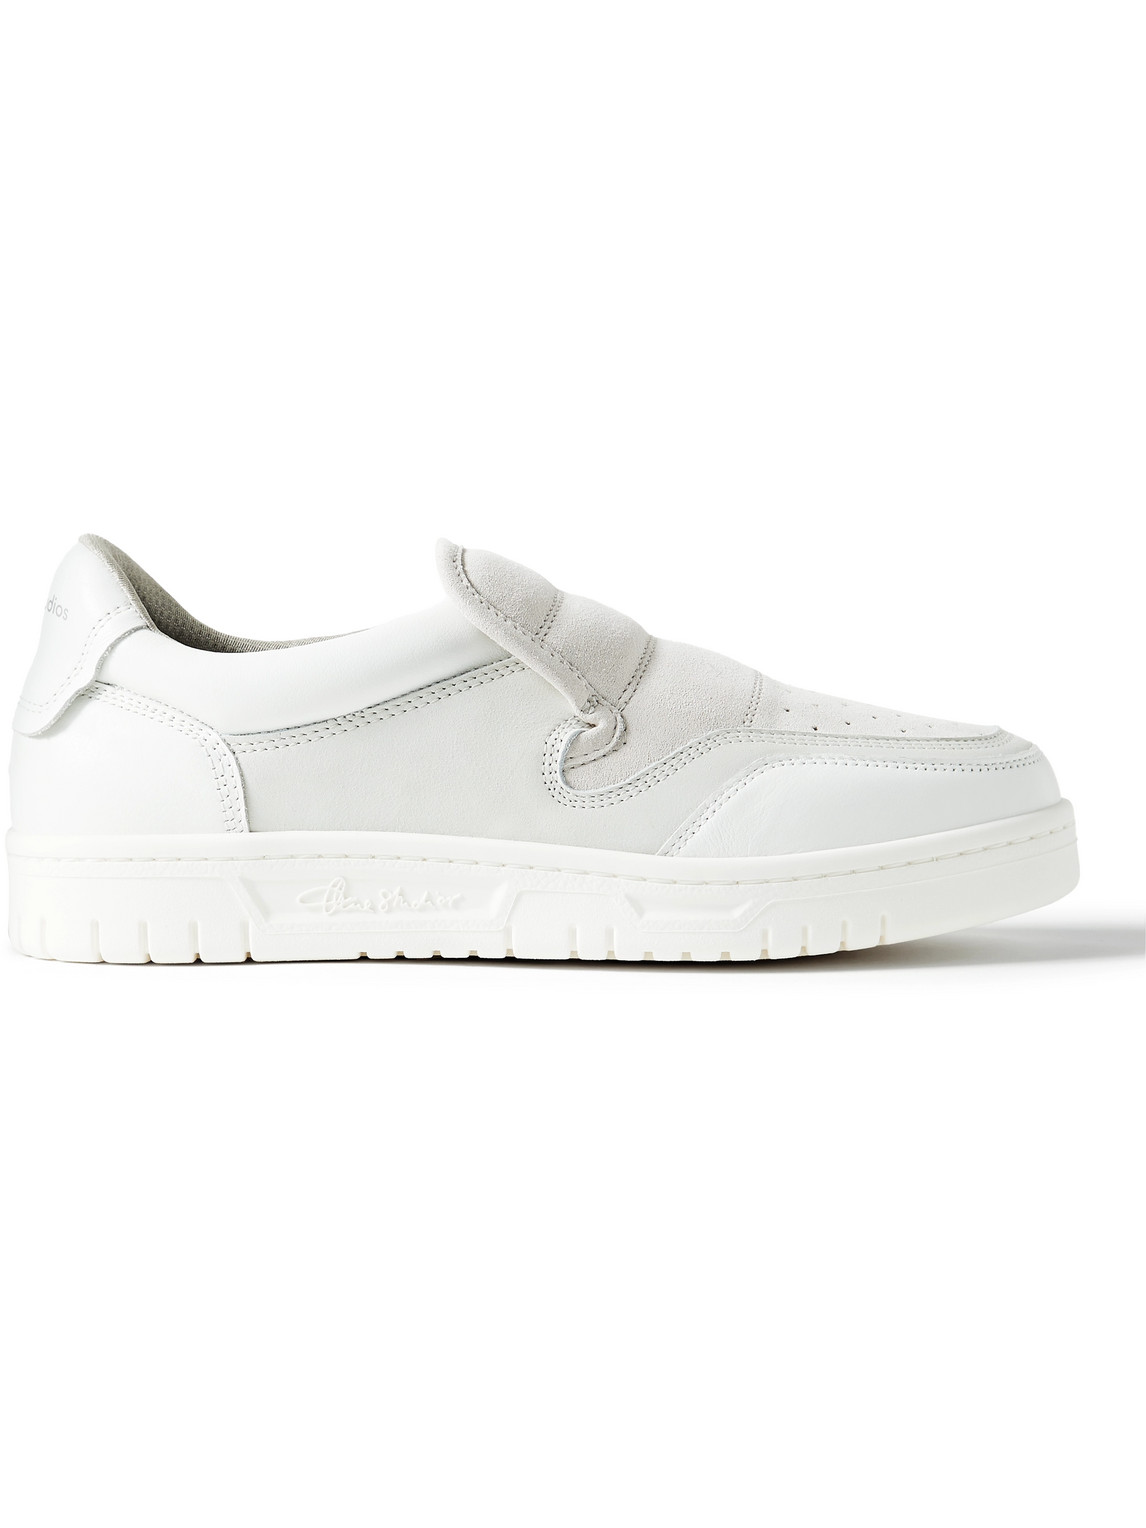 Acne Studios Buller Suede And Leather Slip-on Sneakers In White